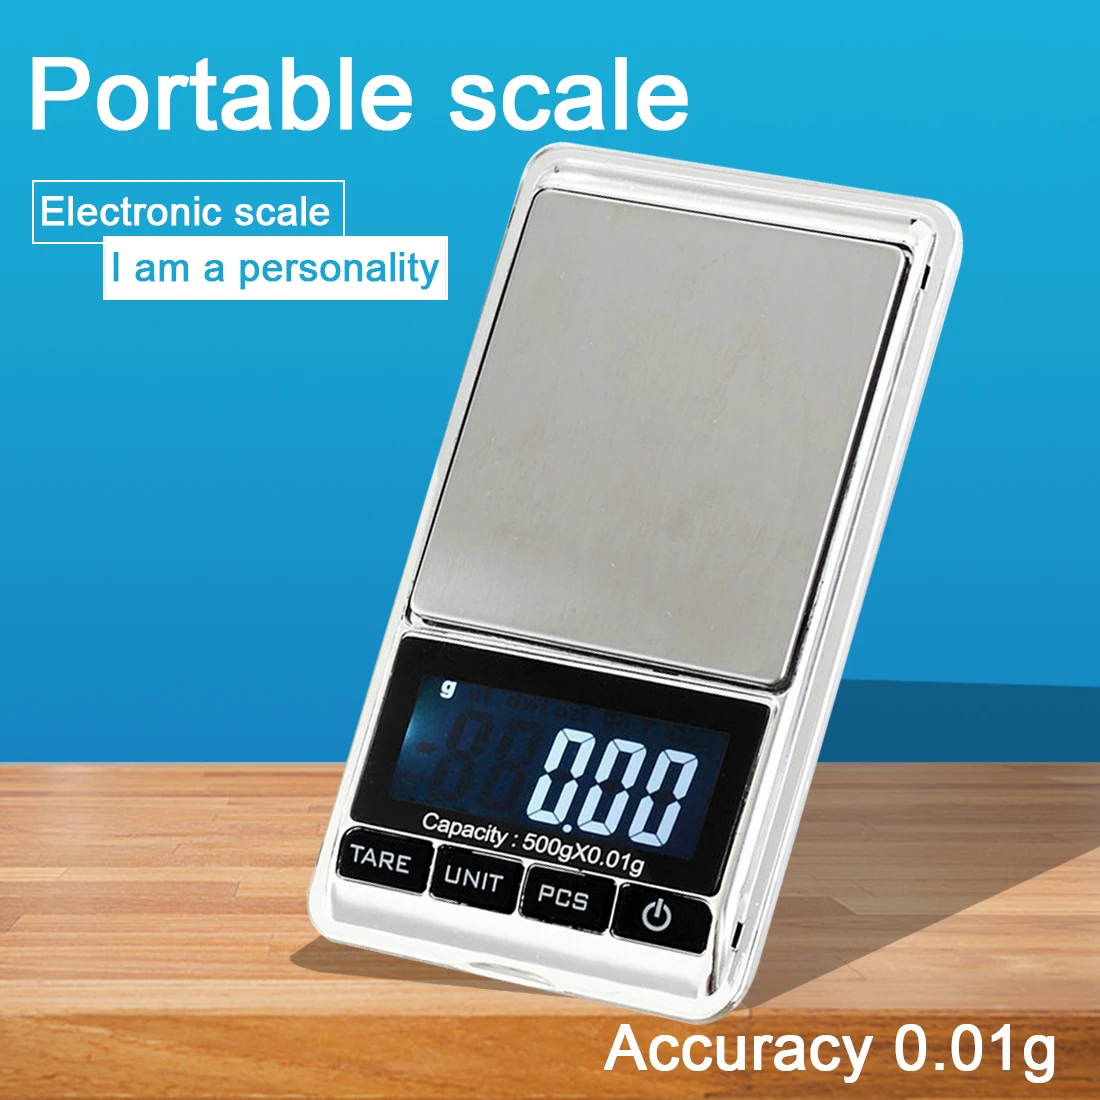 300g Digital Pocket Scales Weight Jewellery Balance Gram Scale Blue LCD 0.01g 